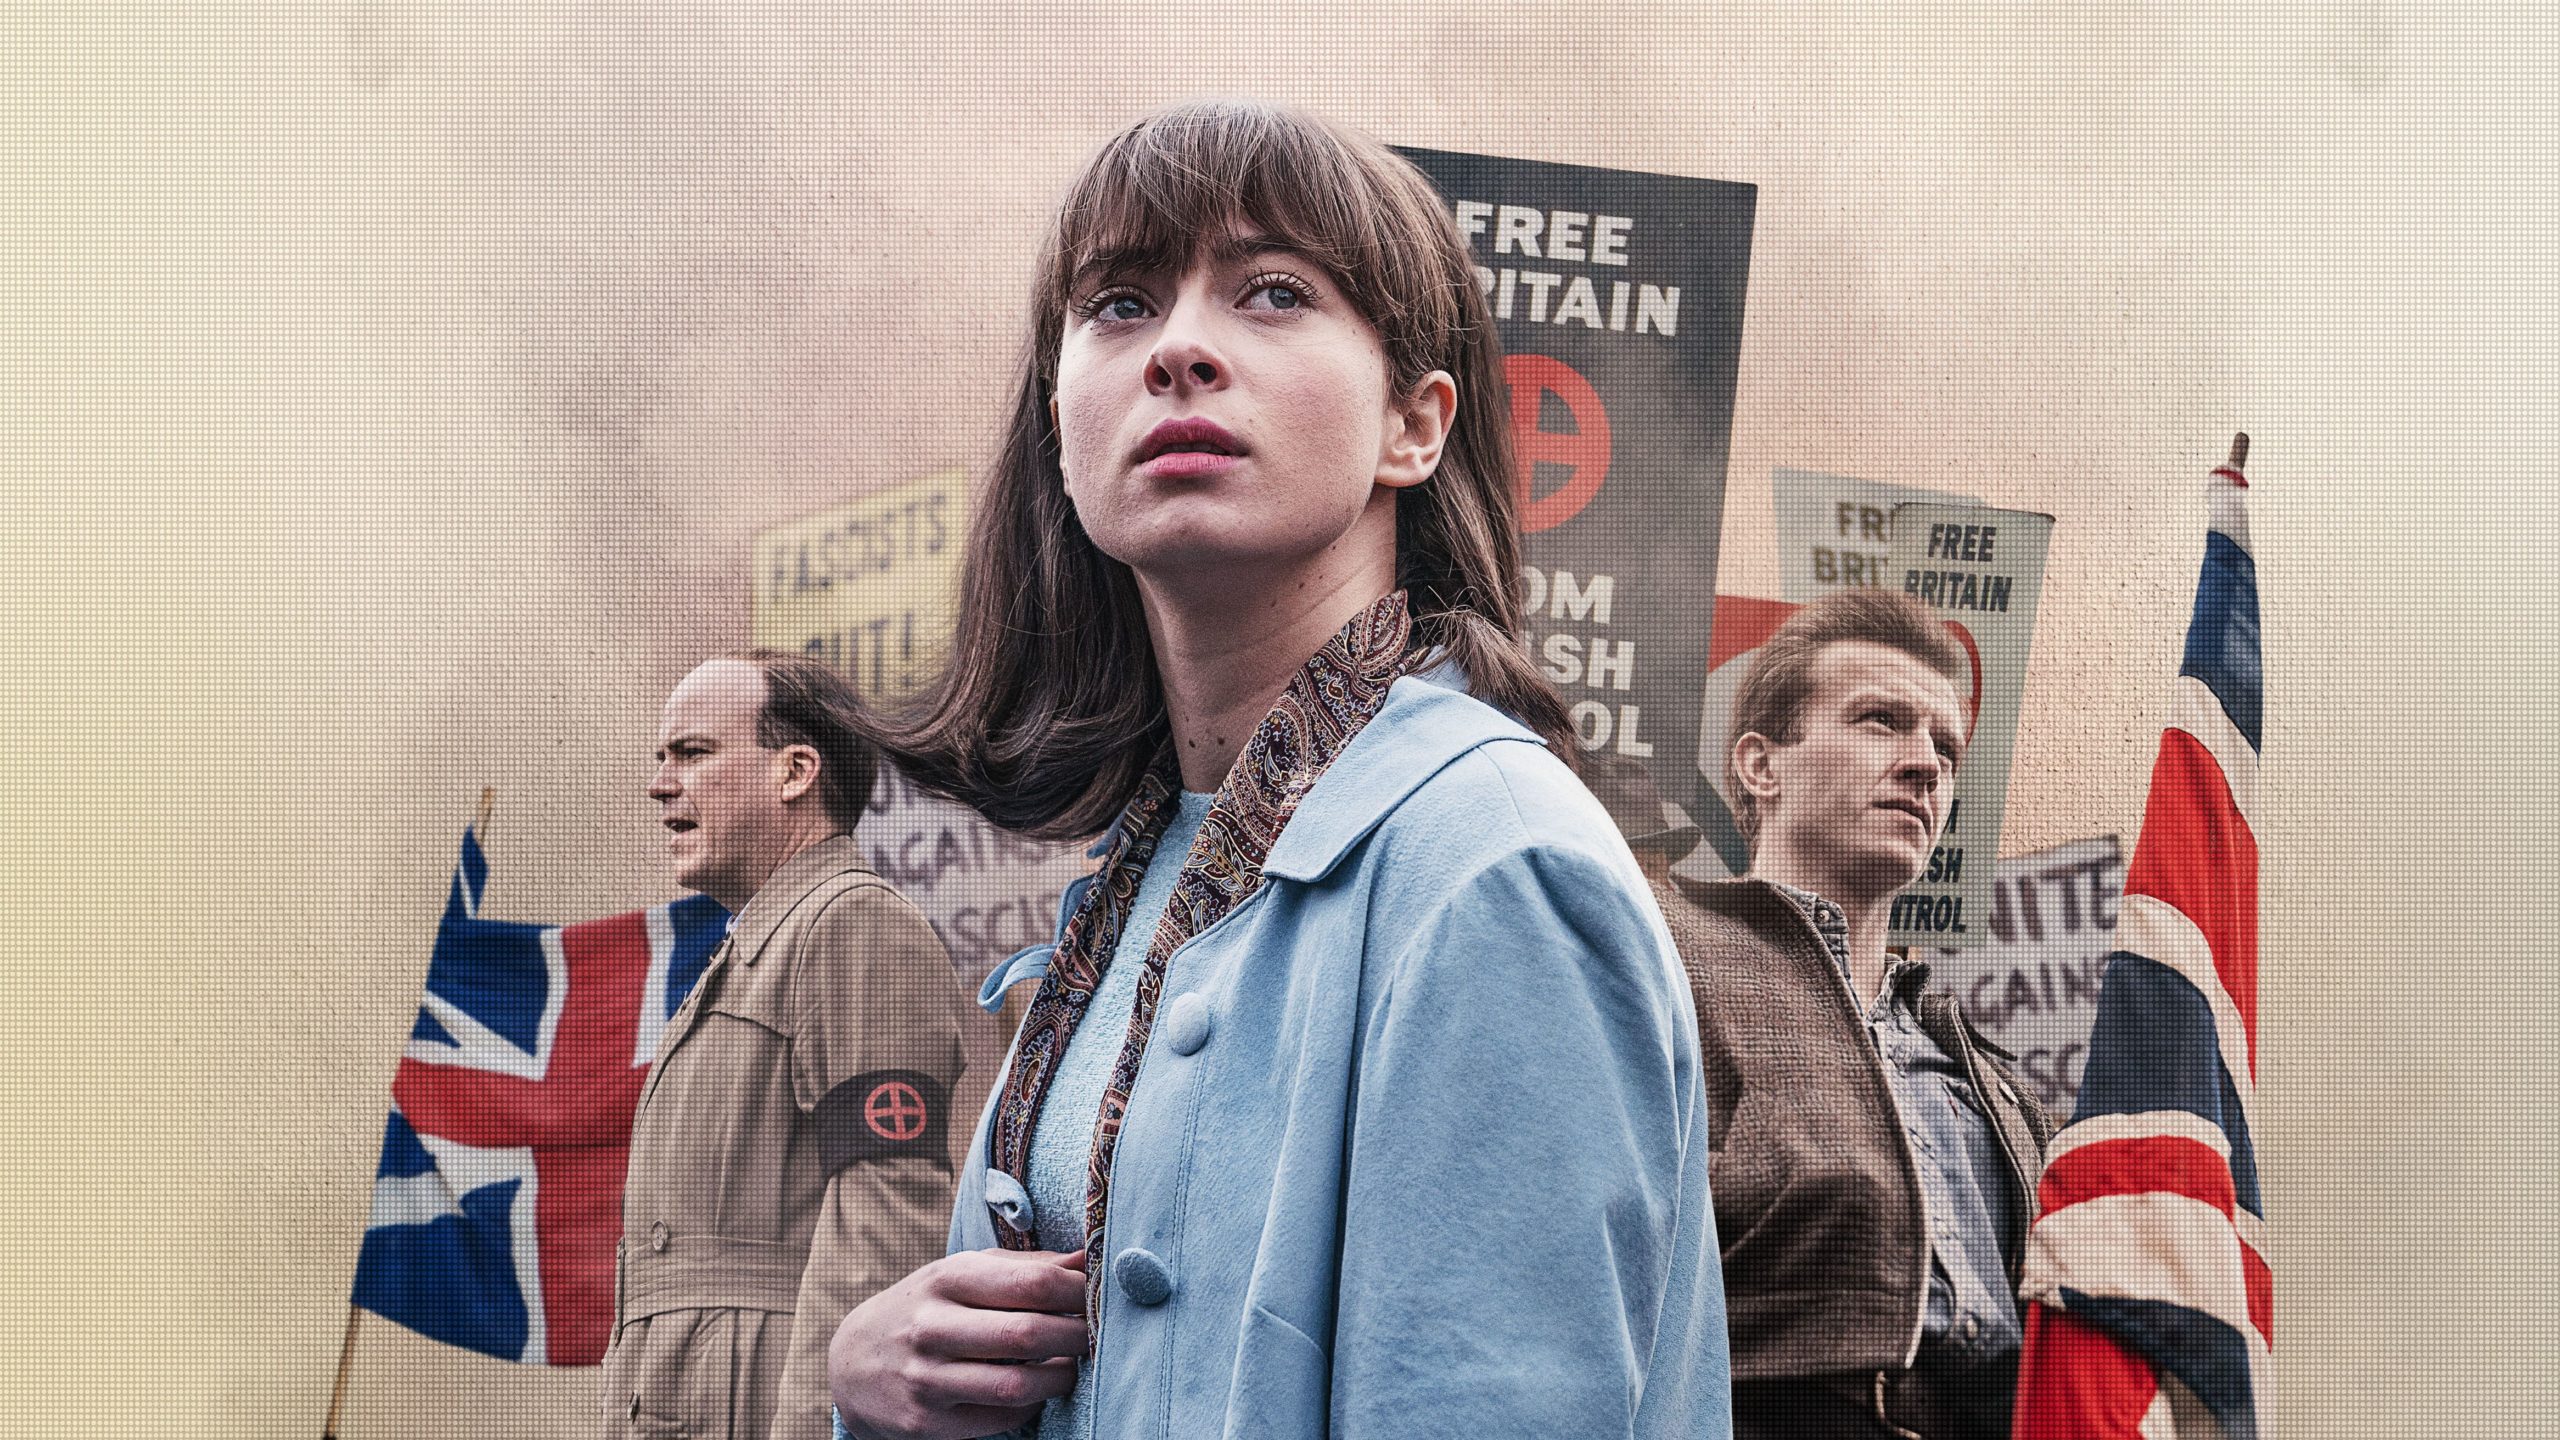 BBC Drama RIDLEY Road Based On The Antifascist Coalition 62 Group True Story Complete Details!